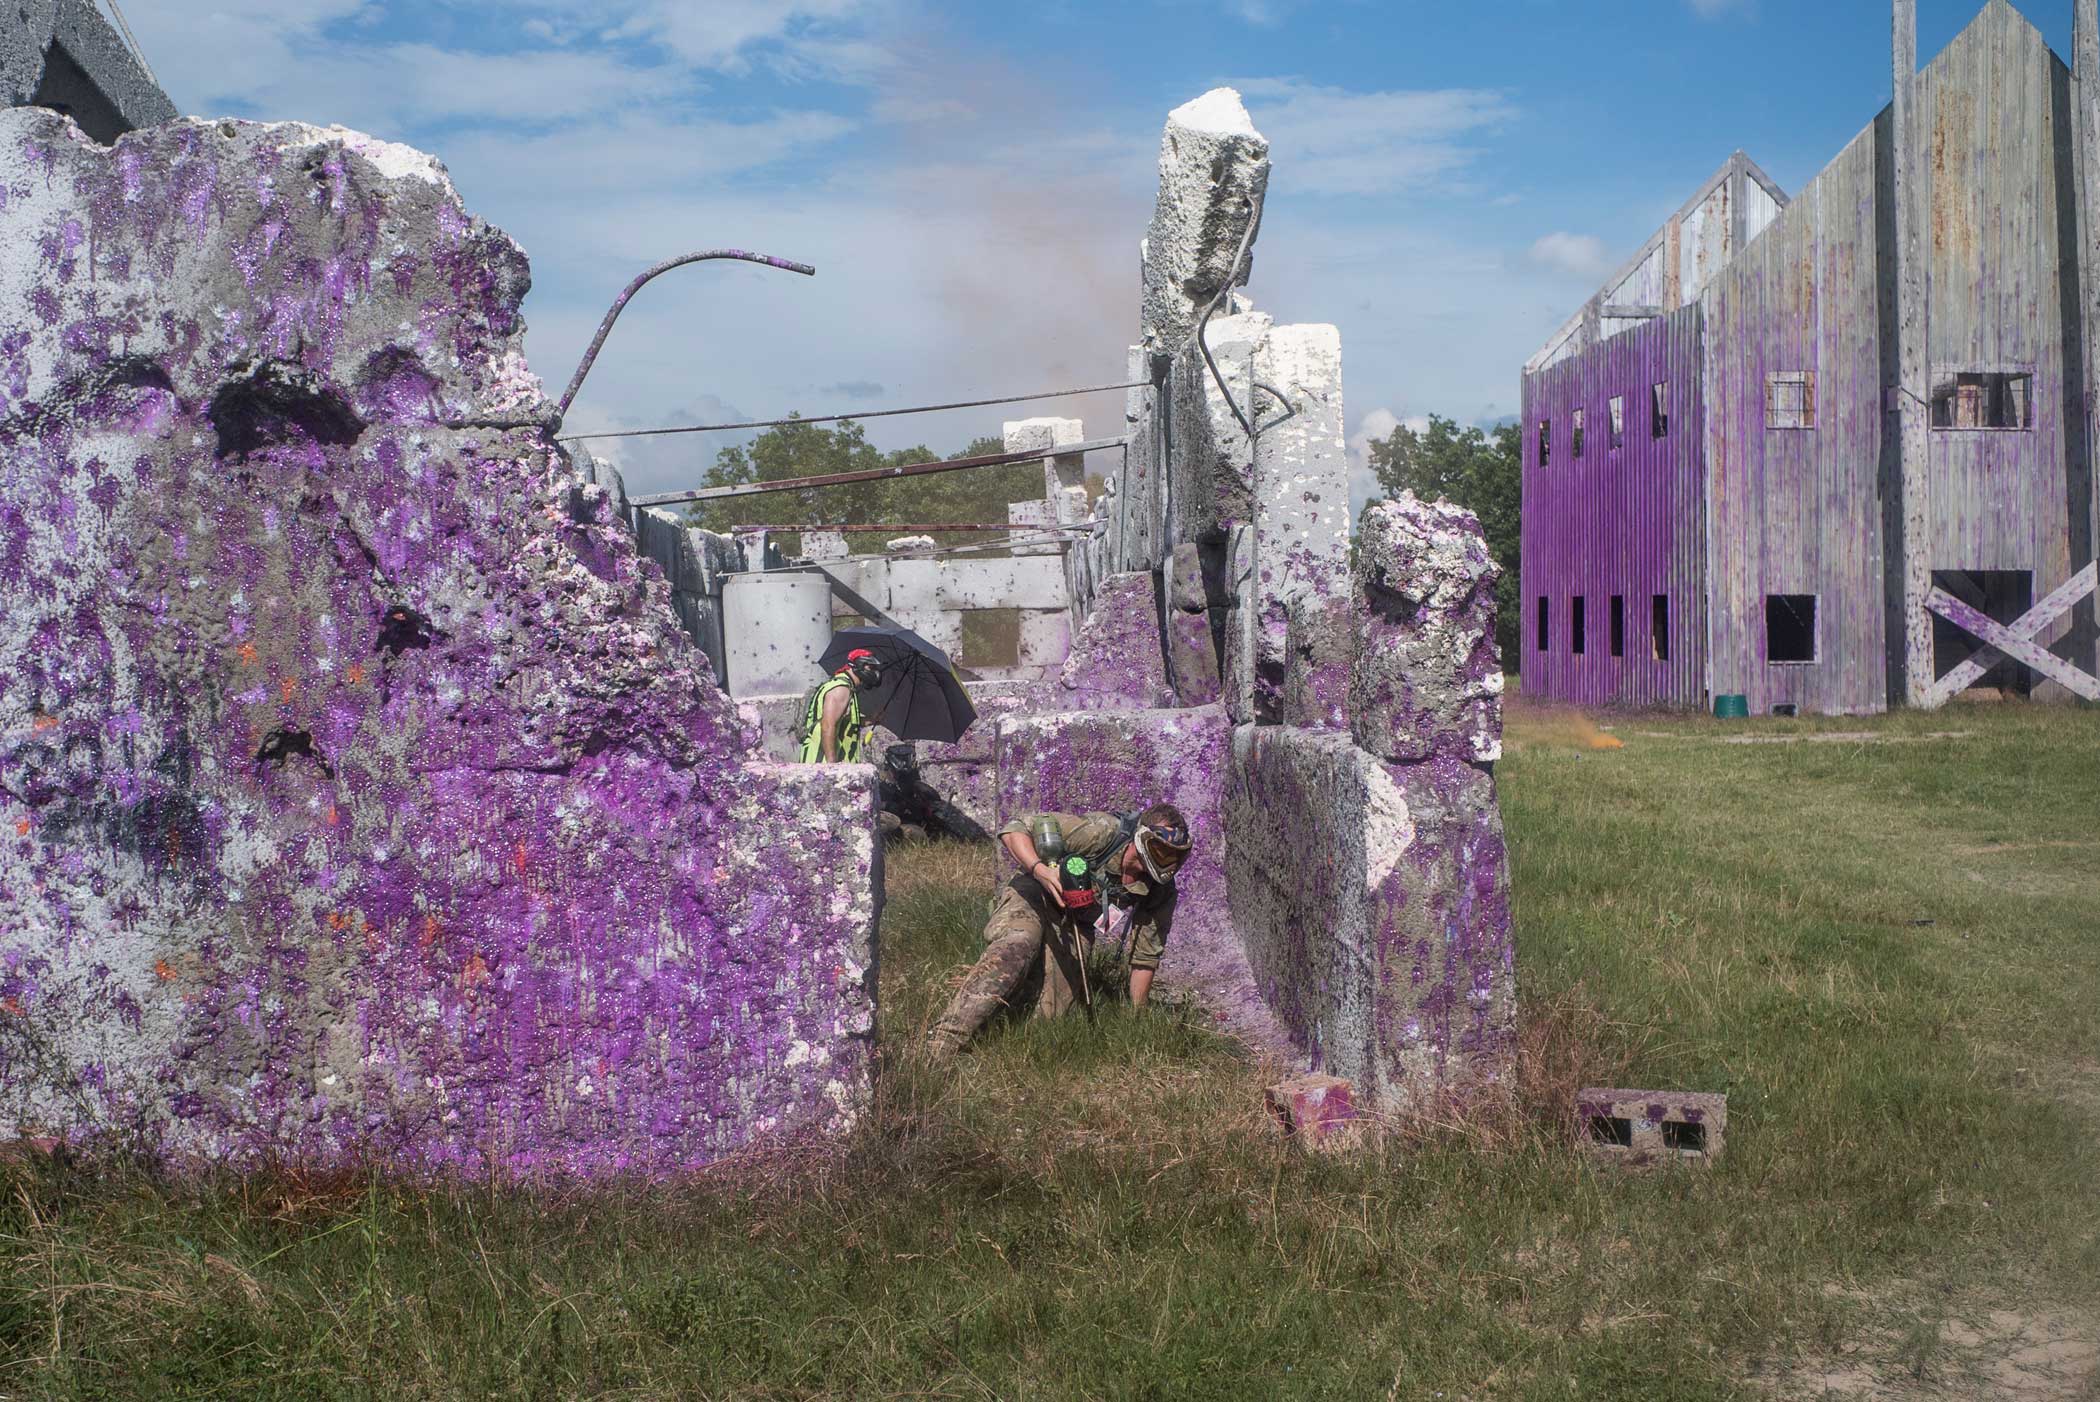 A paintballer takes cover in the town of “Colleville,” which is turned increasingly purple by paintballs over the course of the week.